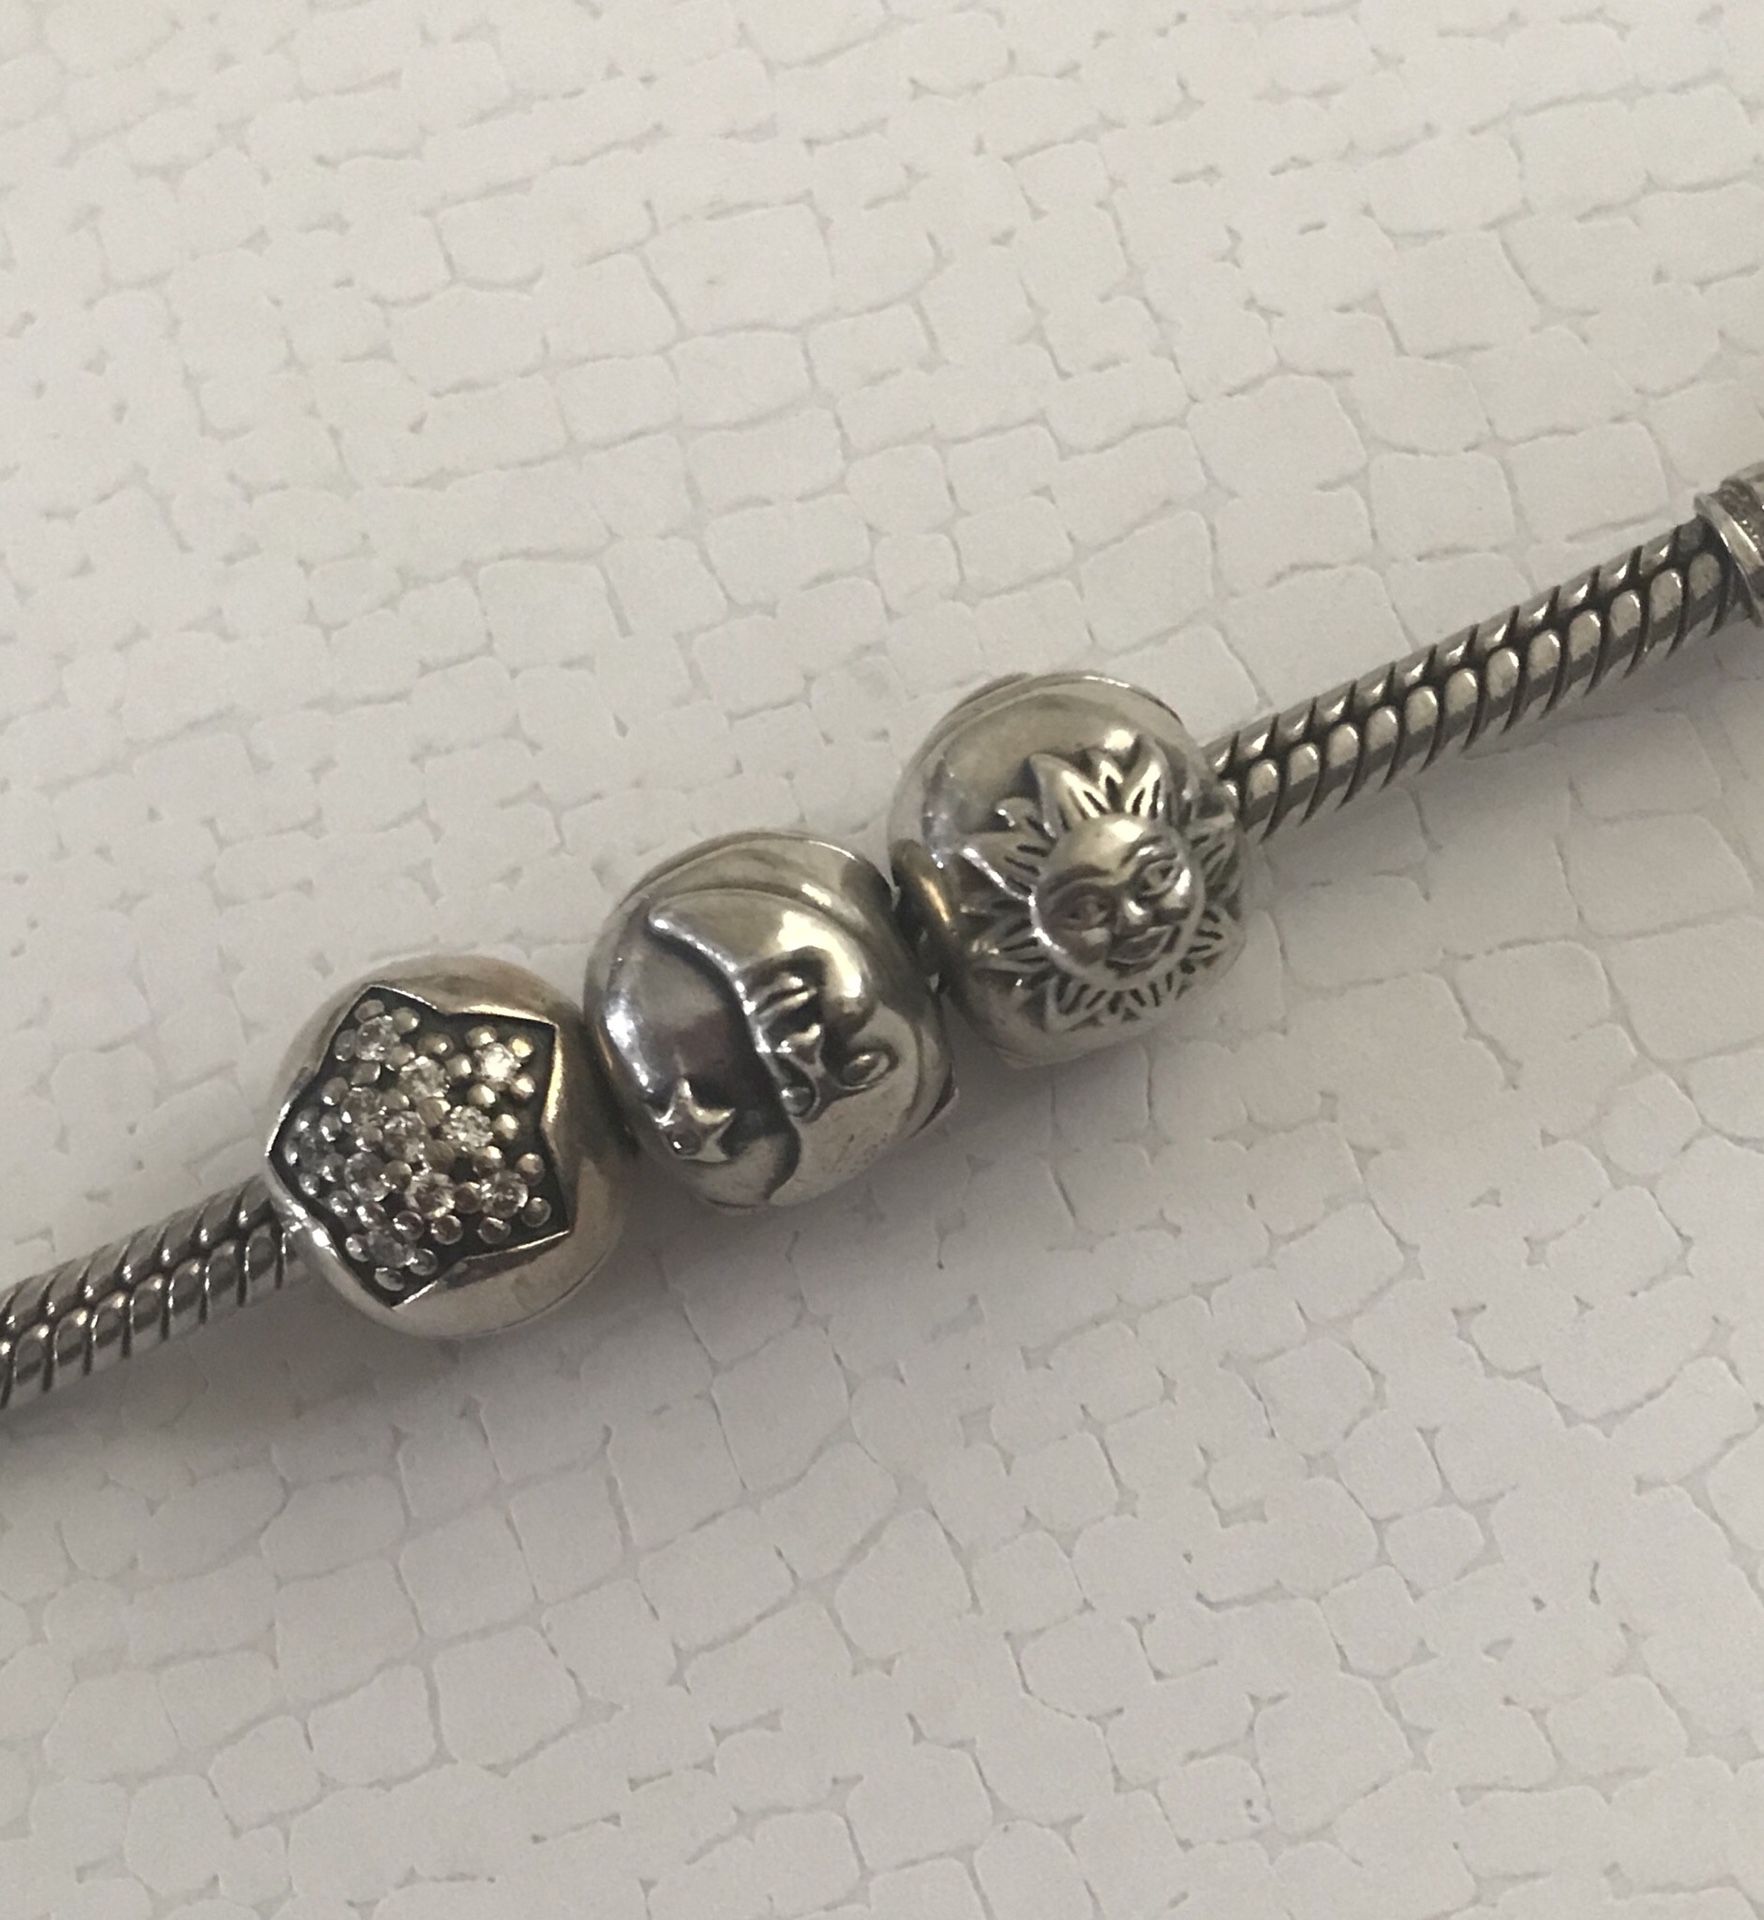 Authentic Pandora clips/charms